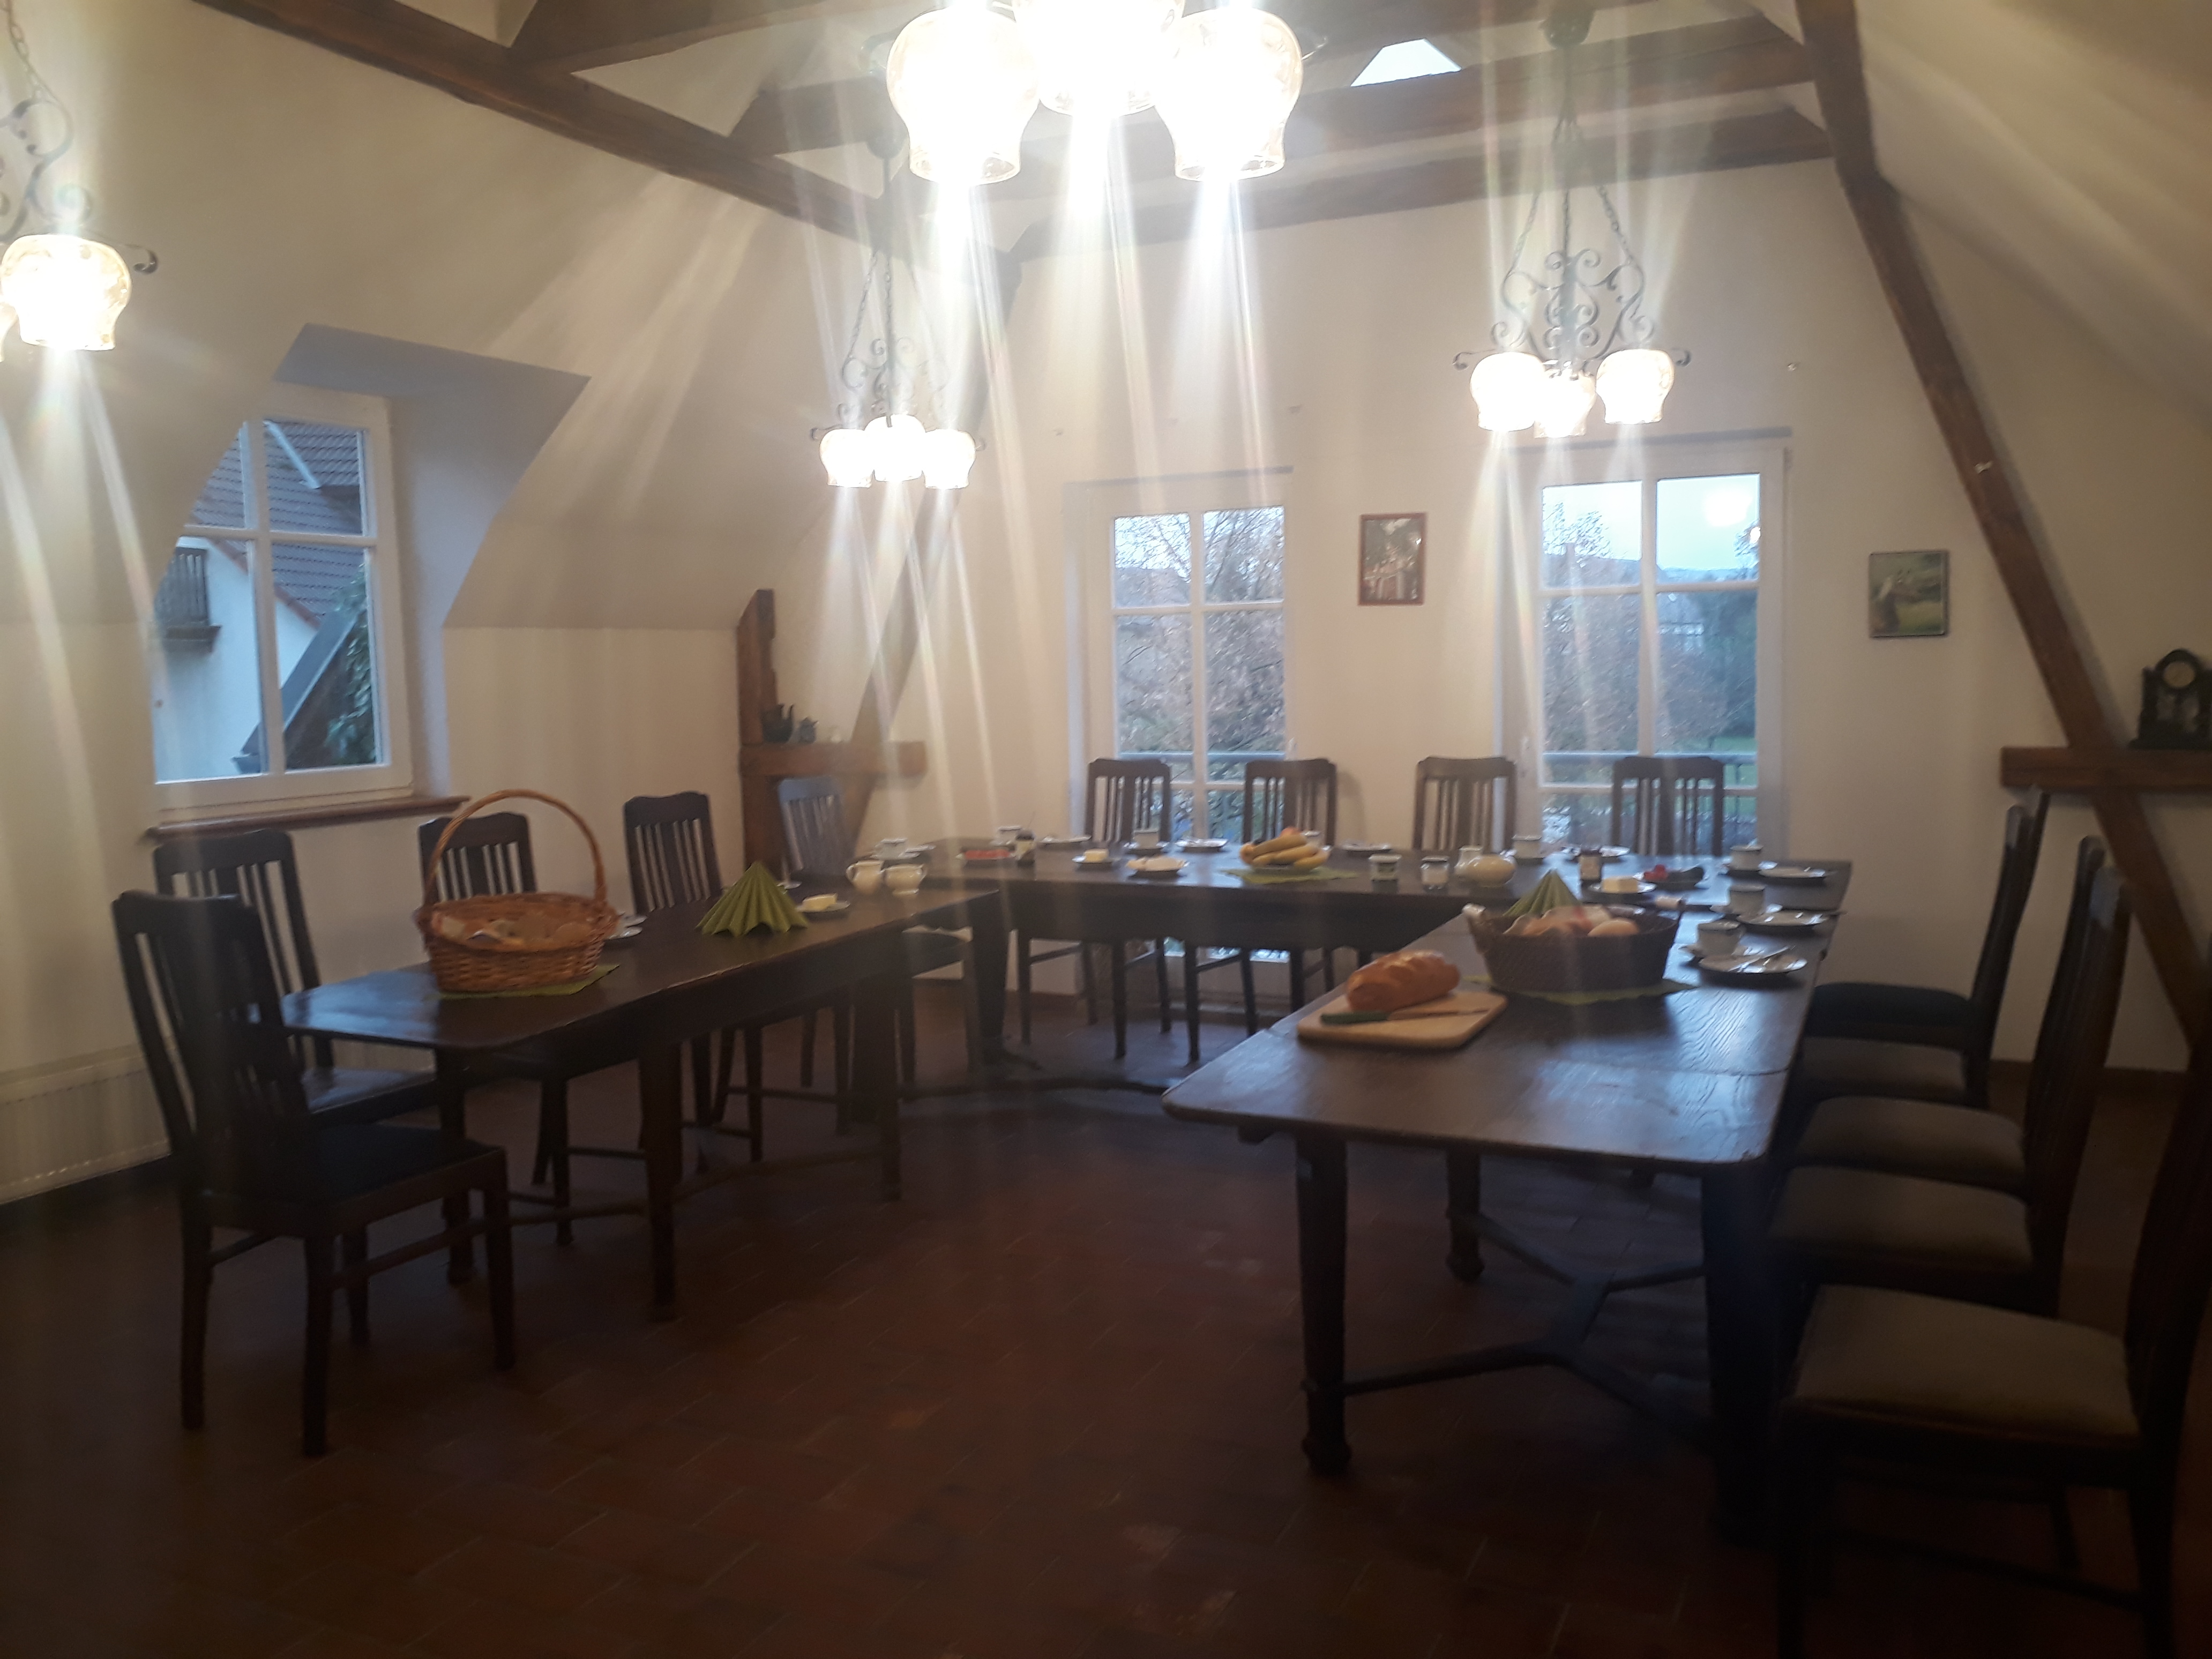 2019 traditionszimmer 2